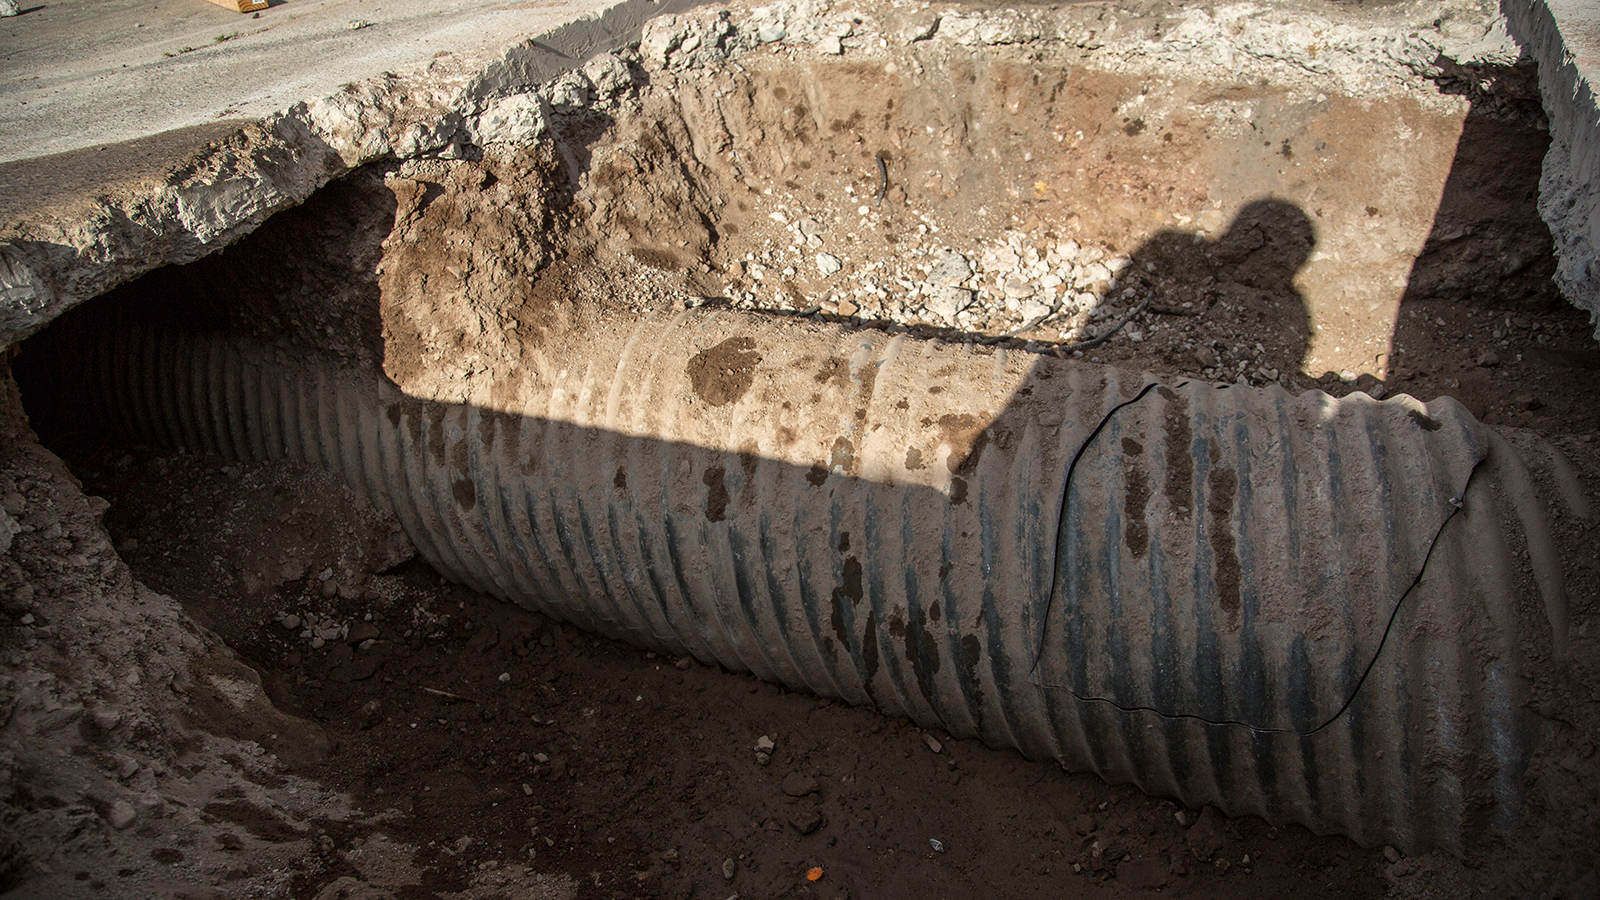 A rudimentary, hand-dug tunnel connected the diggers to the Nogales drainage system through a "break-in" which can be seen in this photograph.